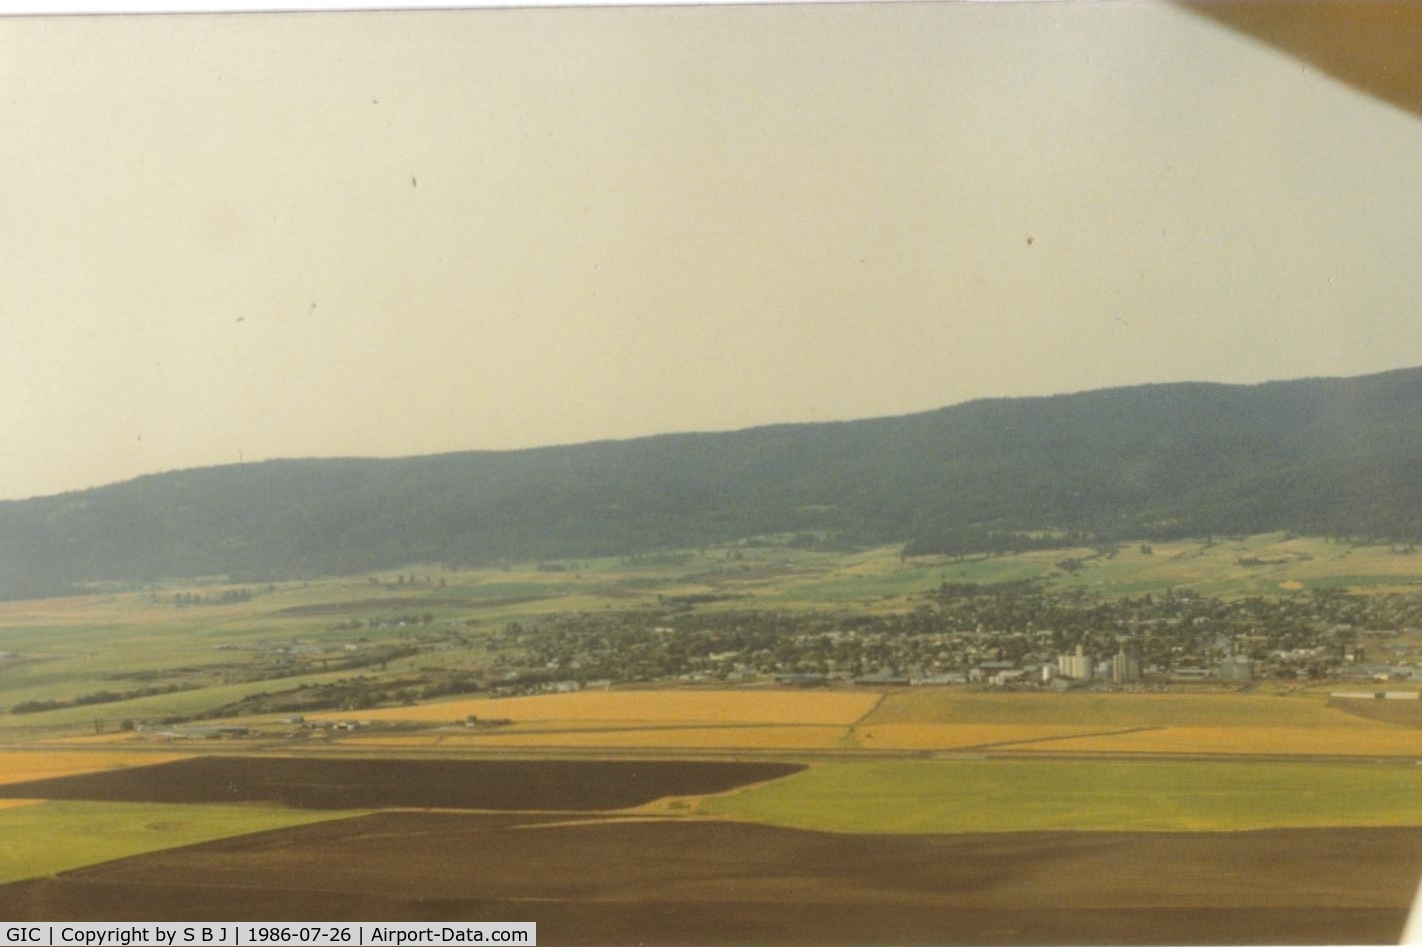 Idaho County Airport (GIC) - Picture of Grangeville airport after departing and on downwind in 1986.